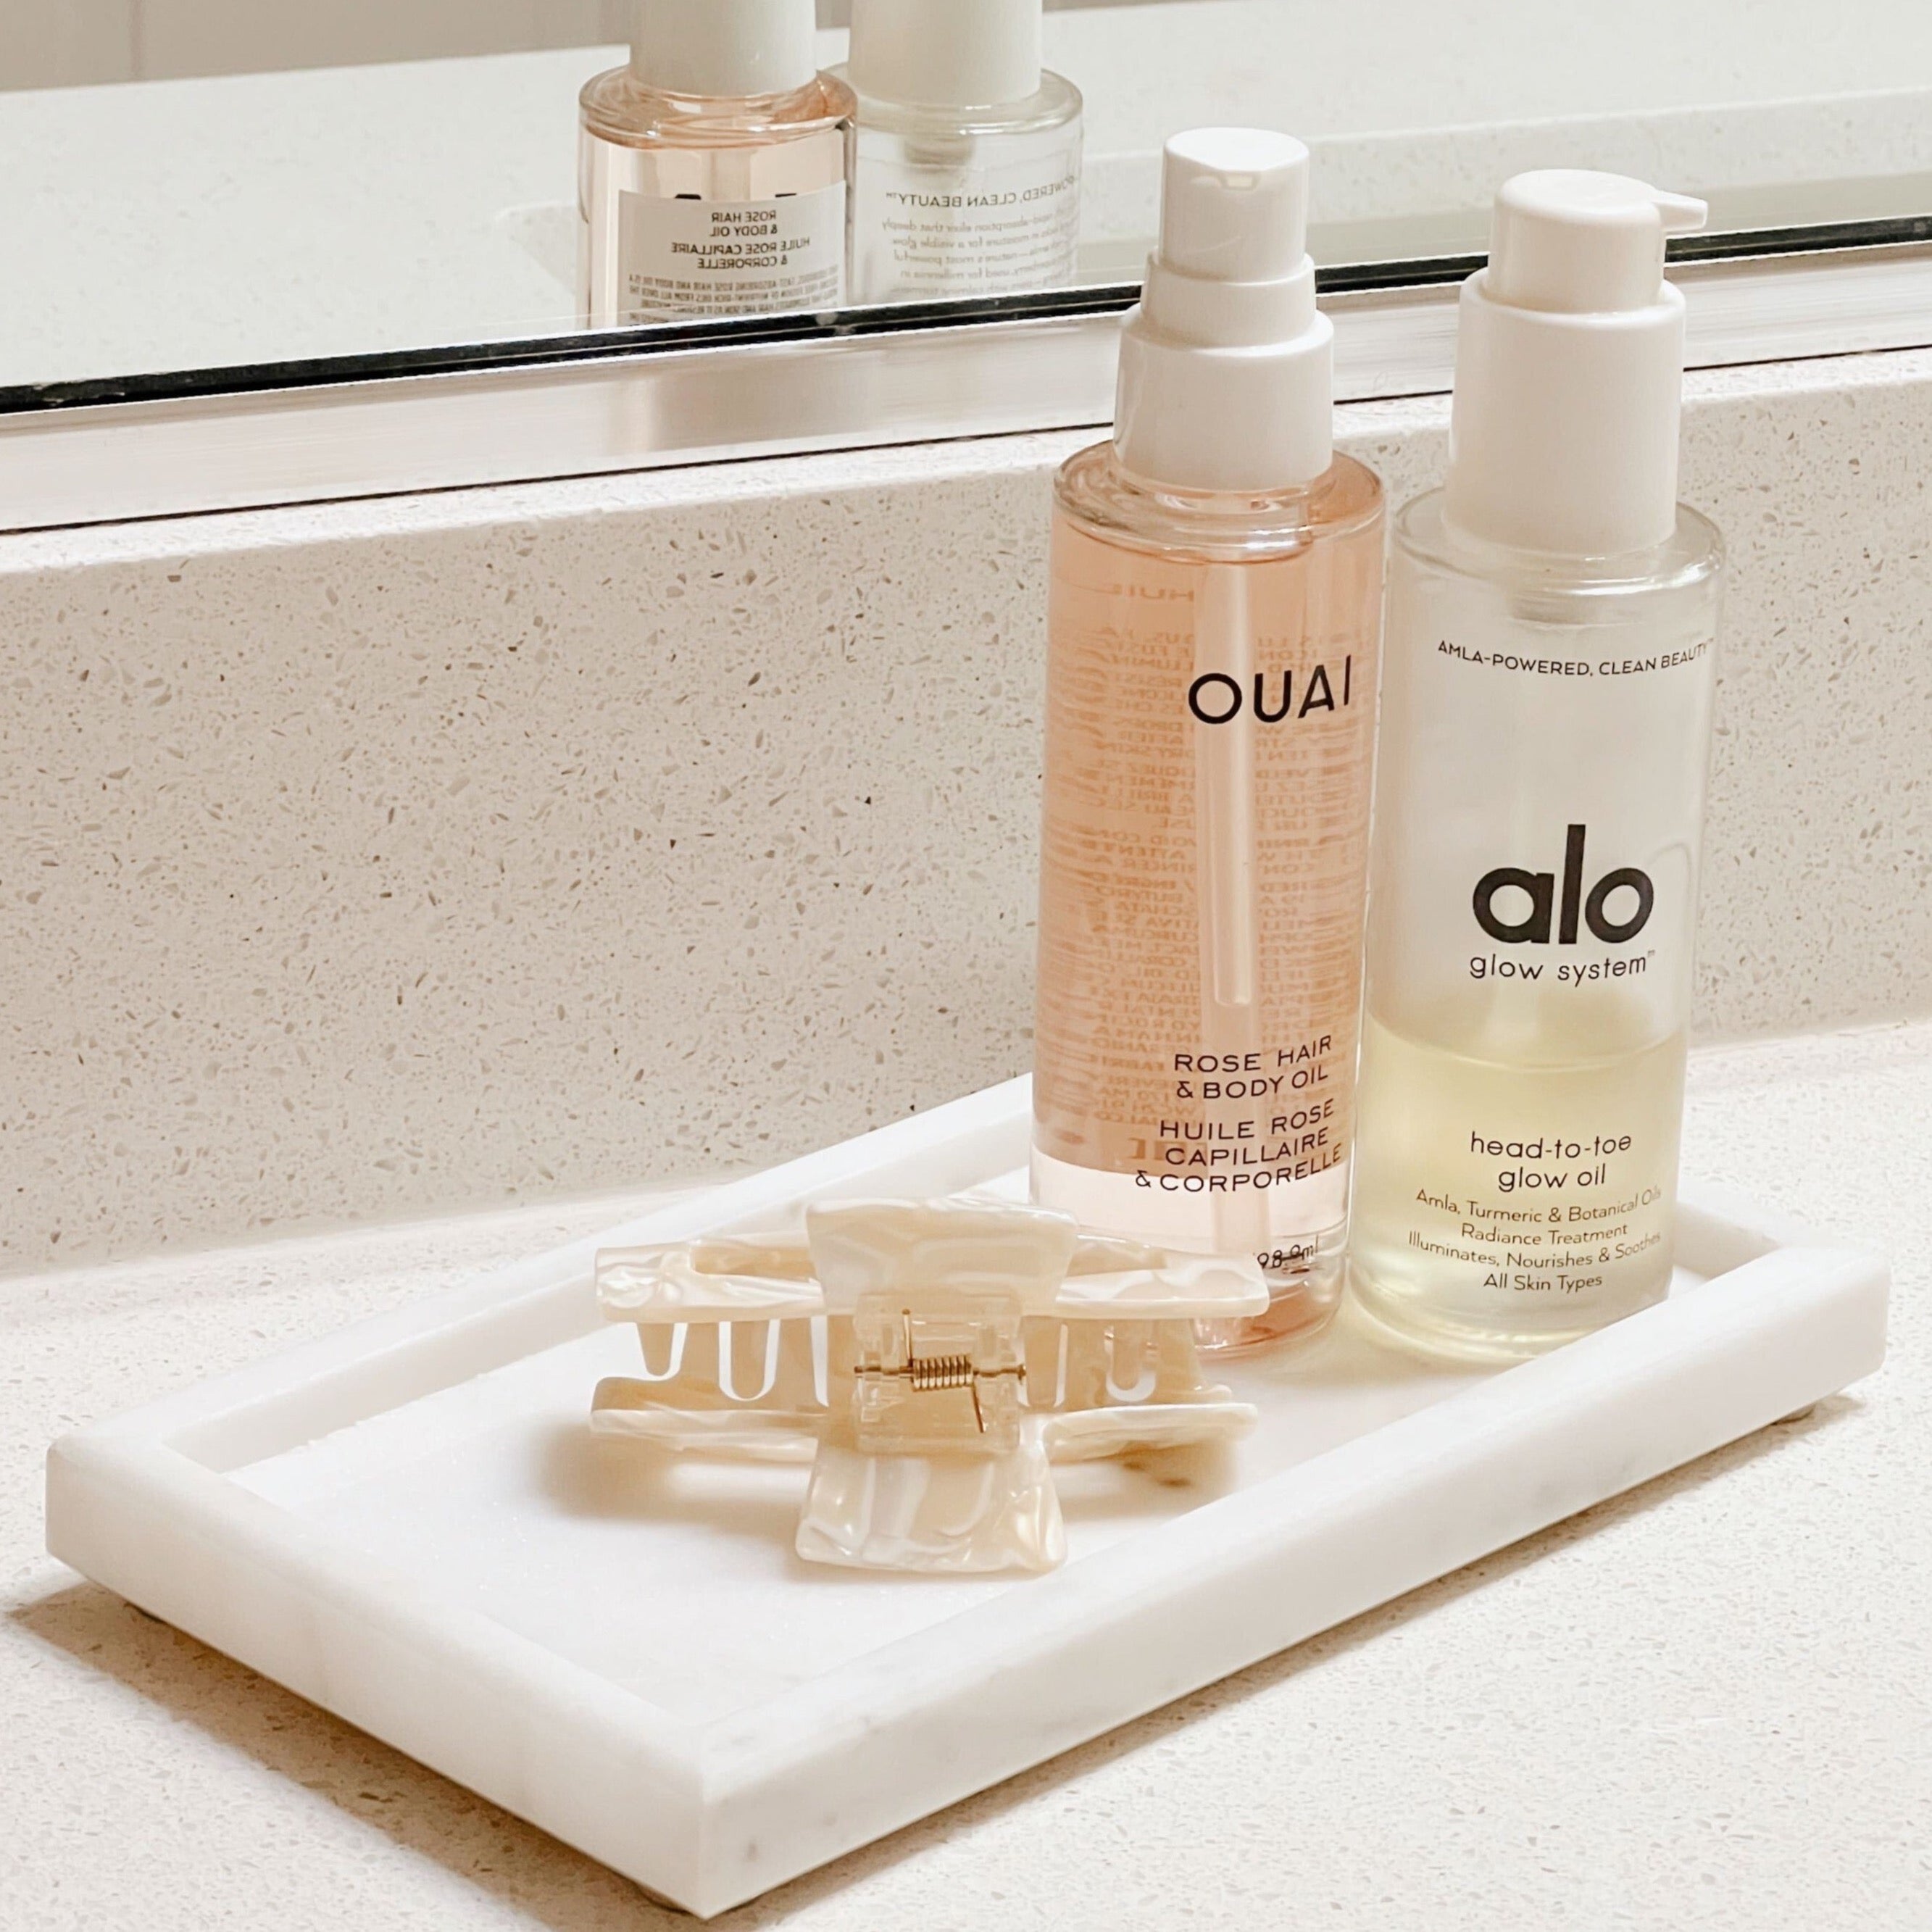 A white marble tray sitting on a white bathroom counter holding a white marble hair clip, Ouai rose hair & body oil, and alo head-to-toe glow oil.